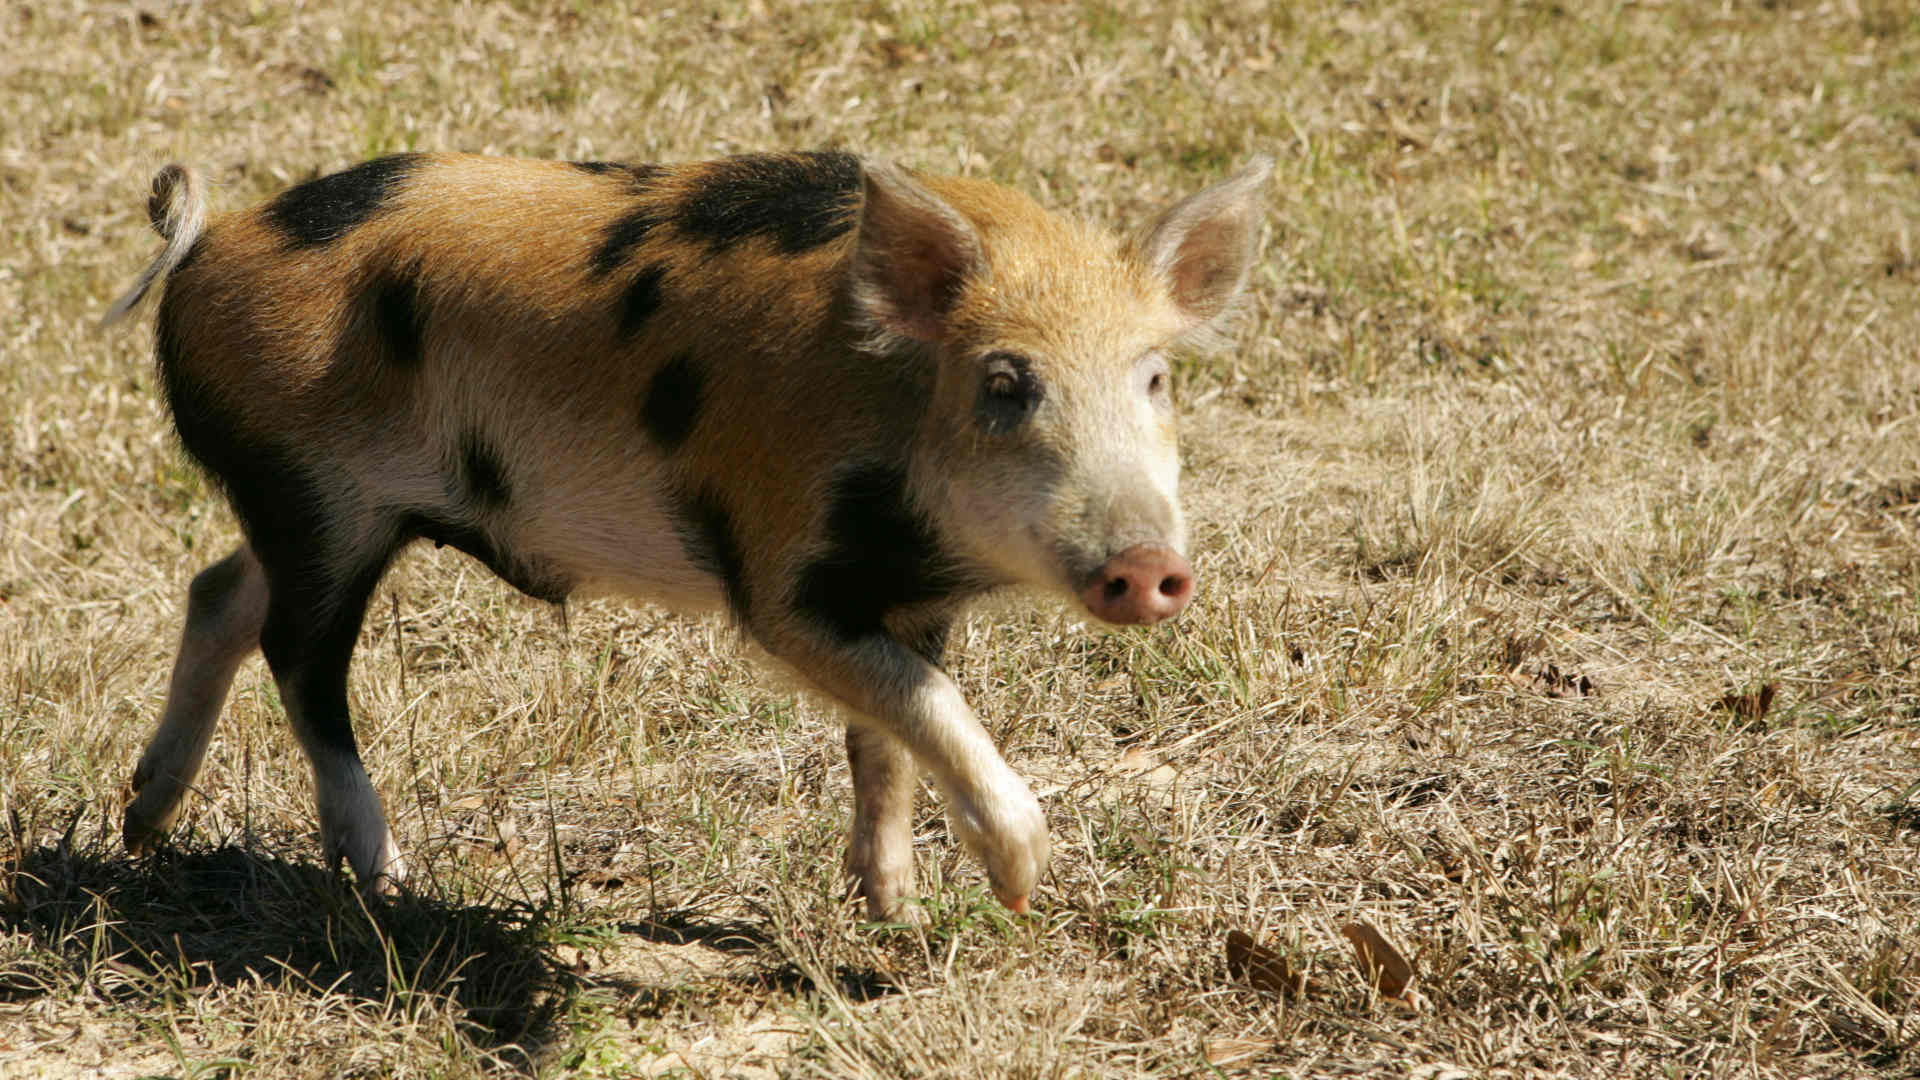 A wild hog in Florida. This invasive species costs the U.S. at least $1.5 billion annually in damage and management.